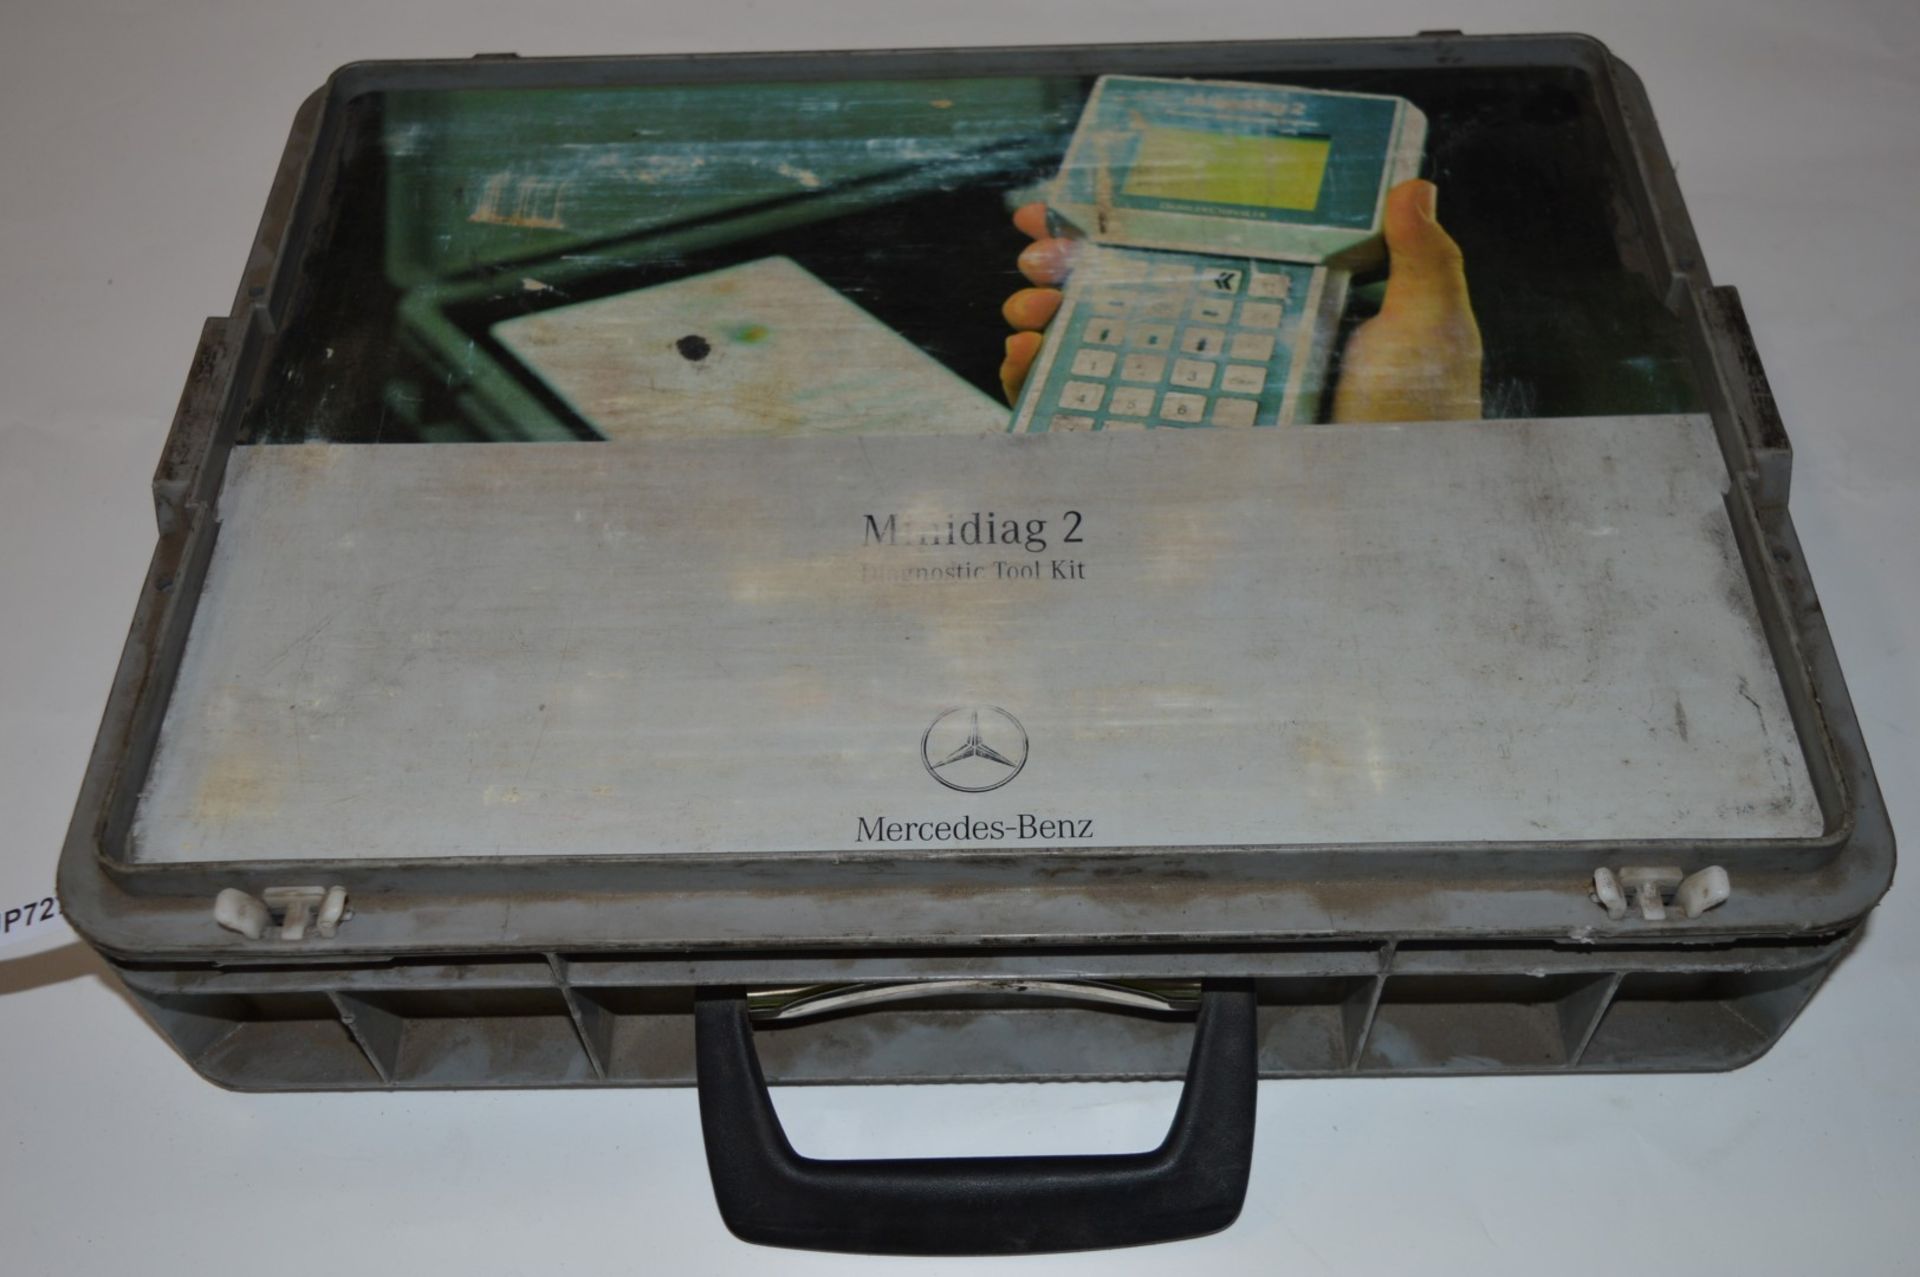 1 x Mercedes-Benz Minidiag2 Diagnostics and Parameter Settings Device - Version C4 - Includes - Image 9 of 9